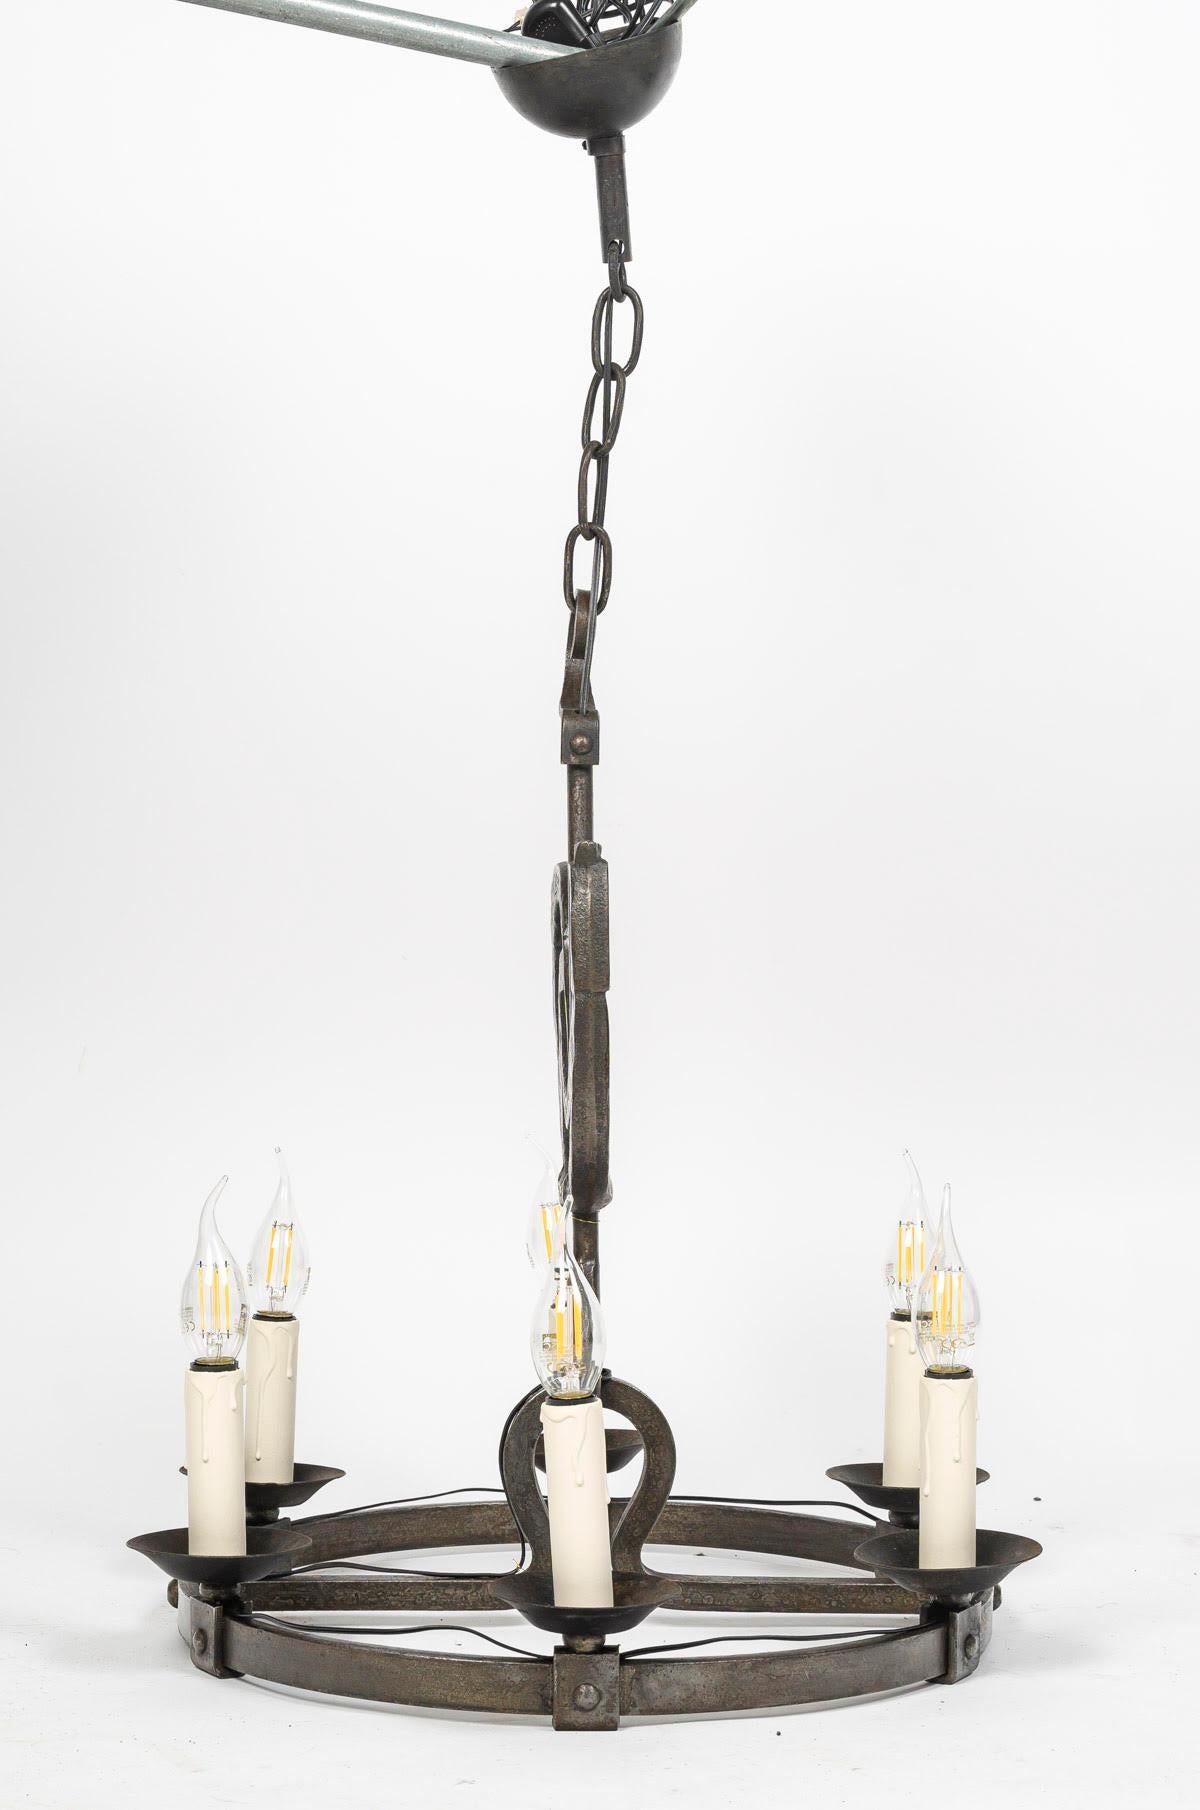 French Pair of 1950s-1960s Wrought Iron Chandeliers by Jean Touret, Marolles Workshop. For Sale